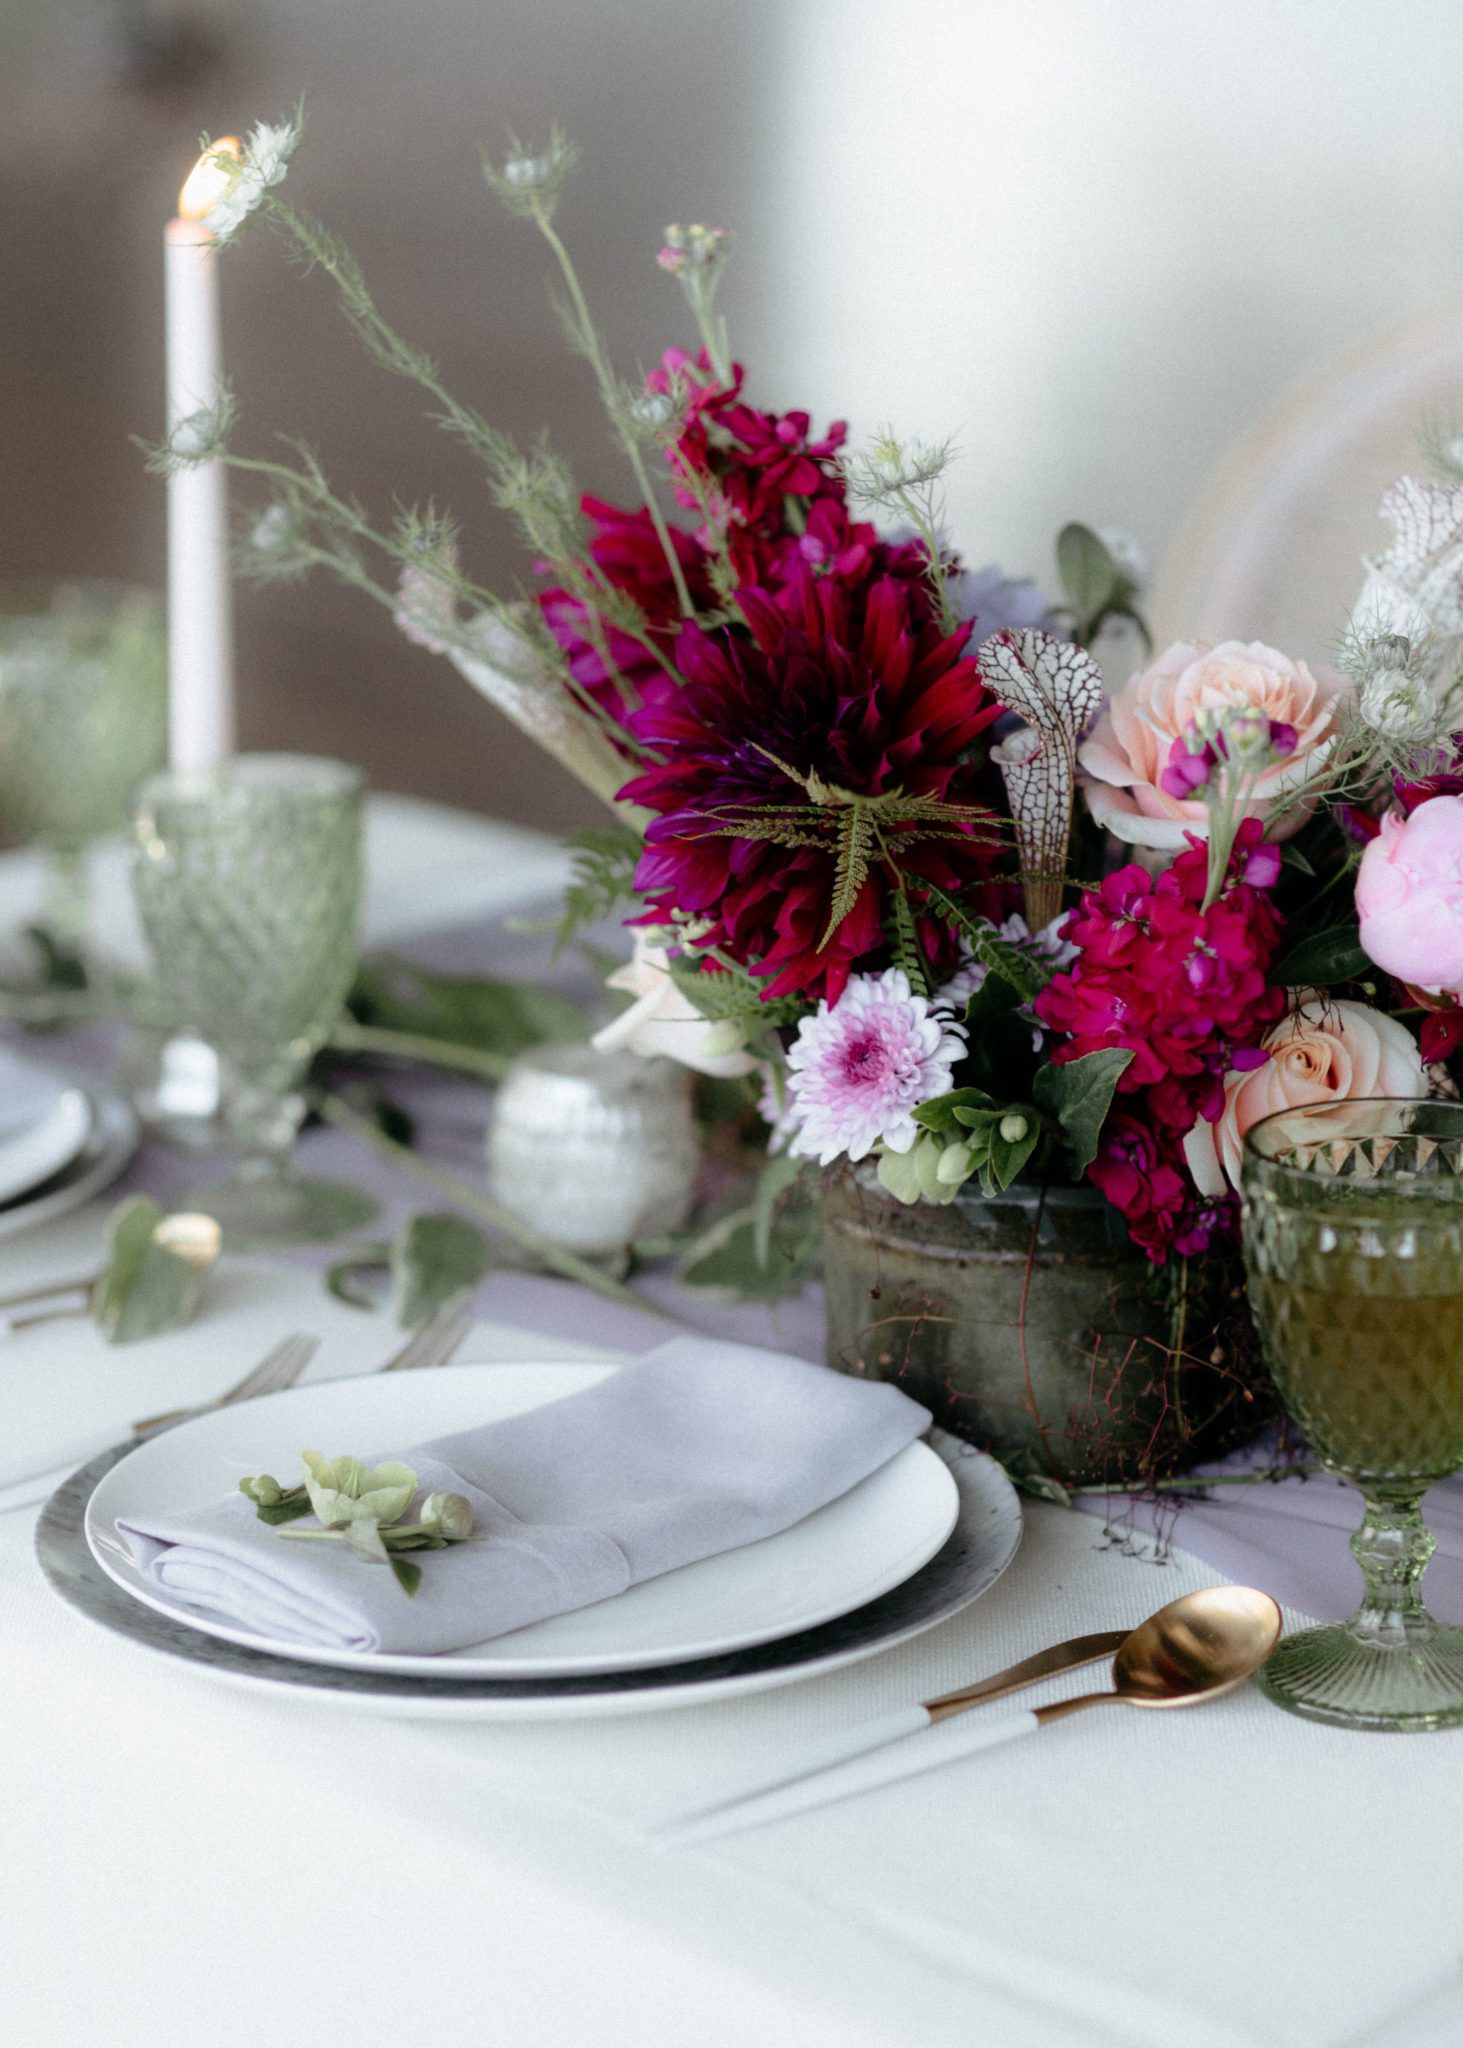 Plum and olive table floral arrangements for wedding reception inspiration